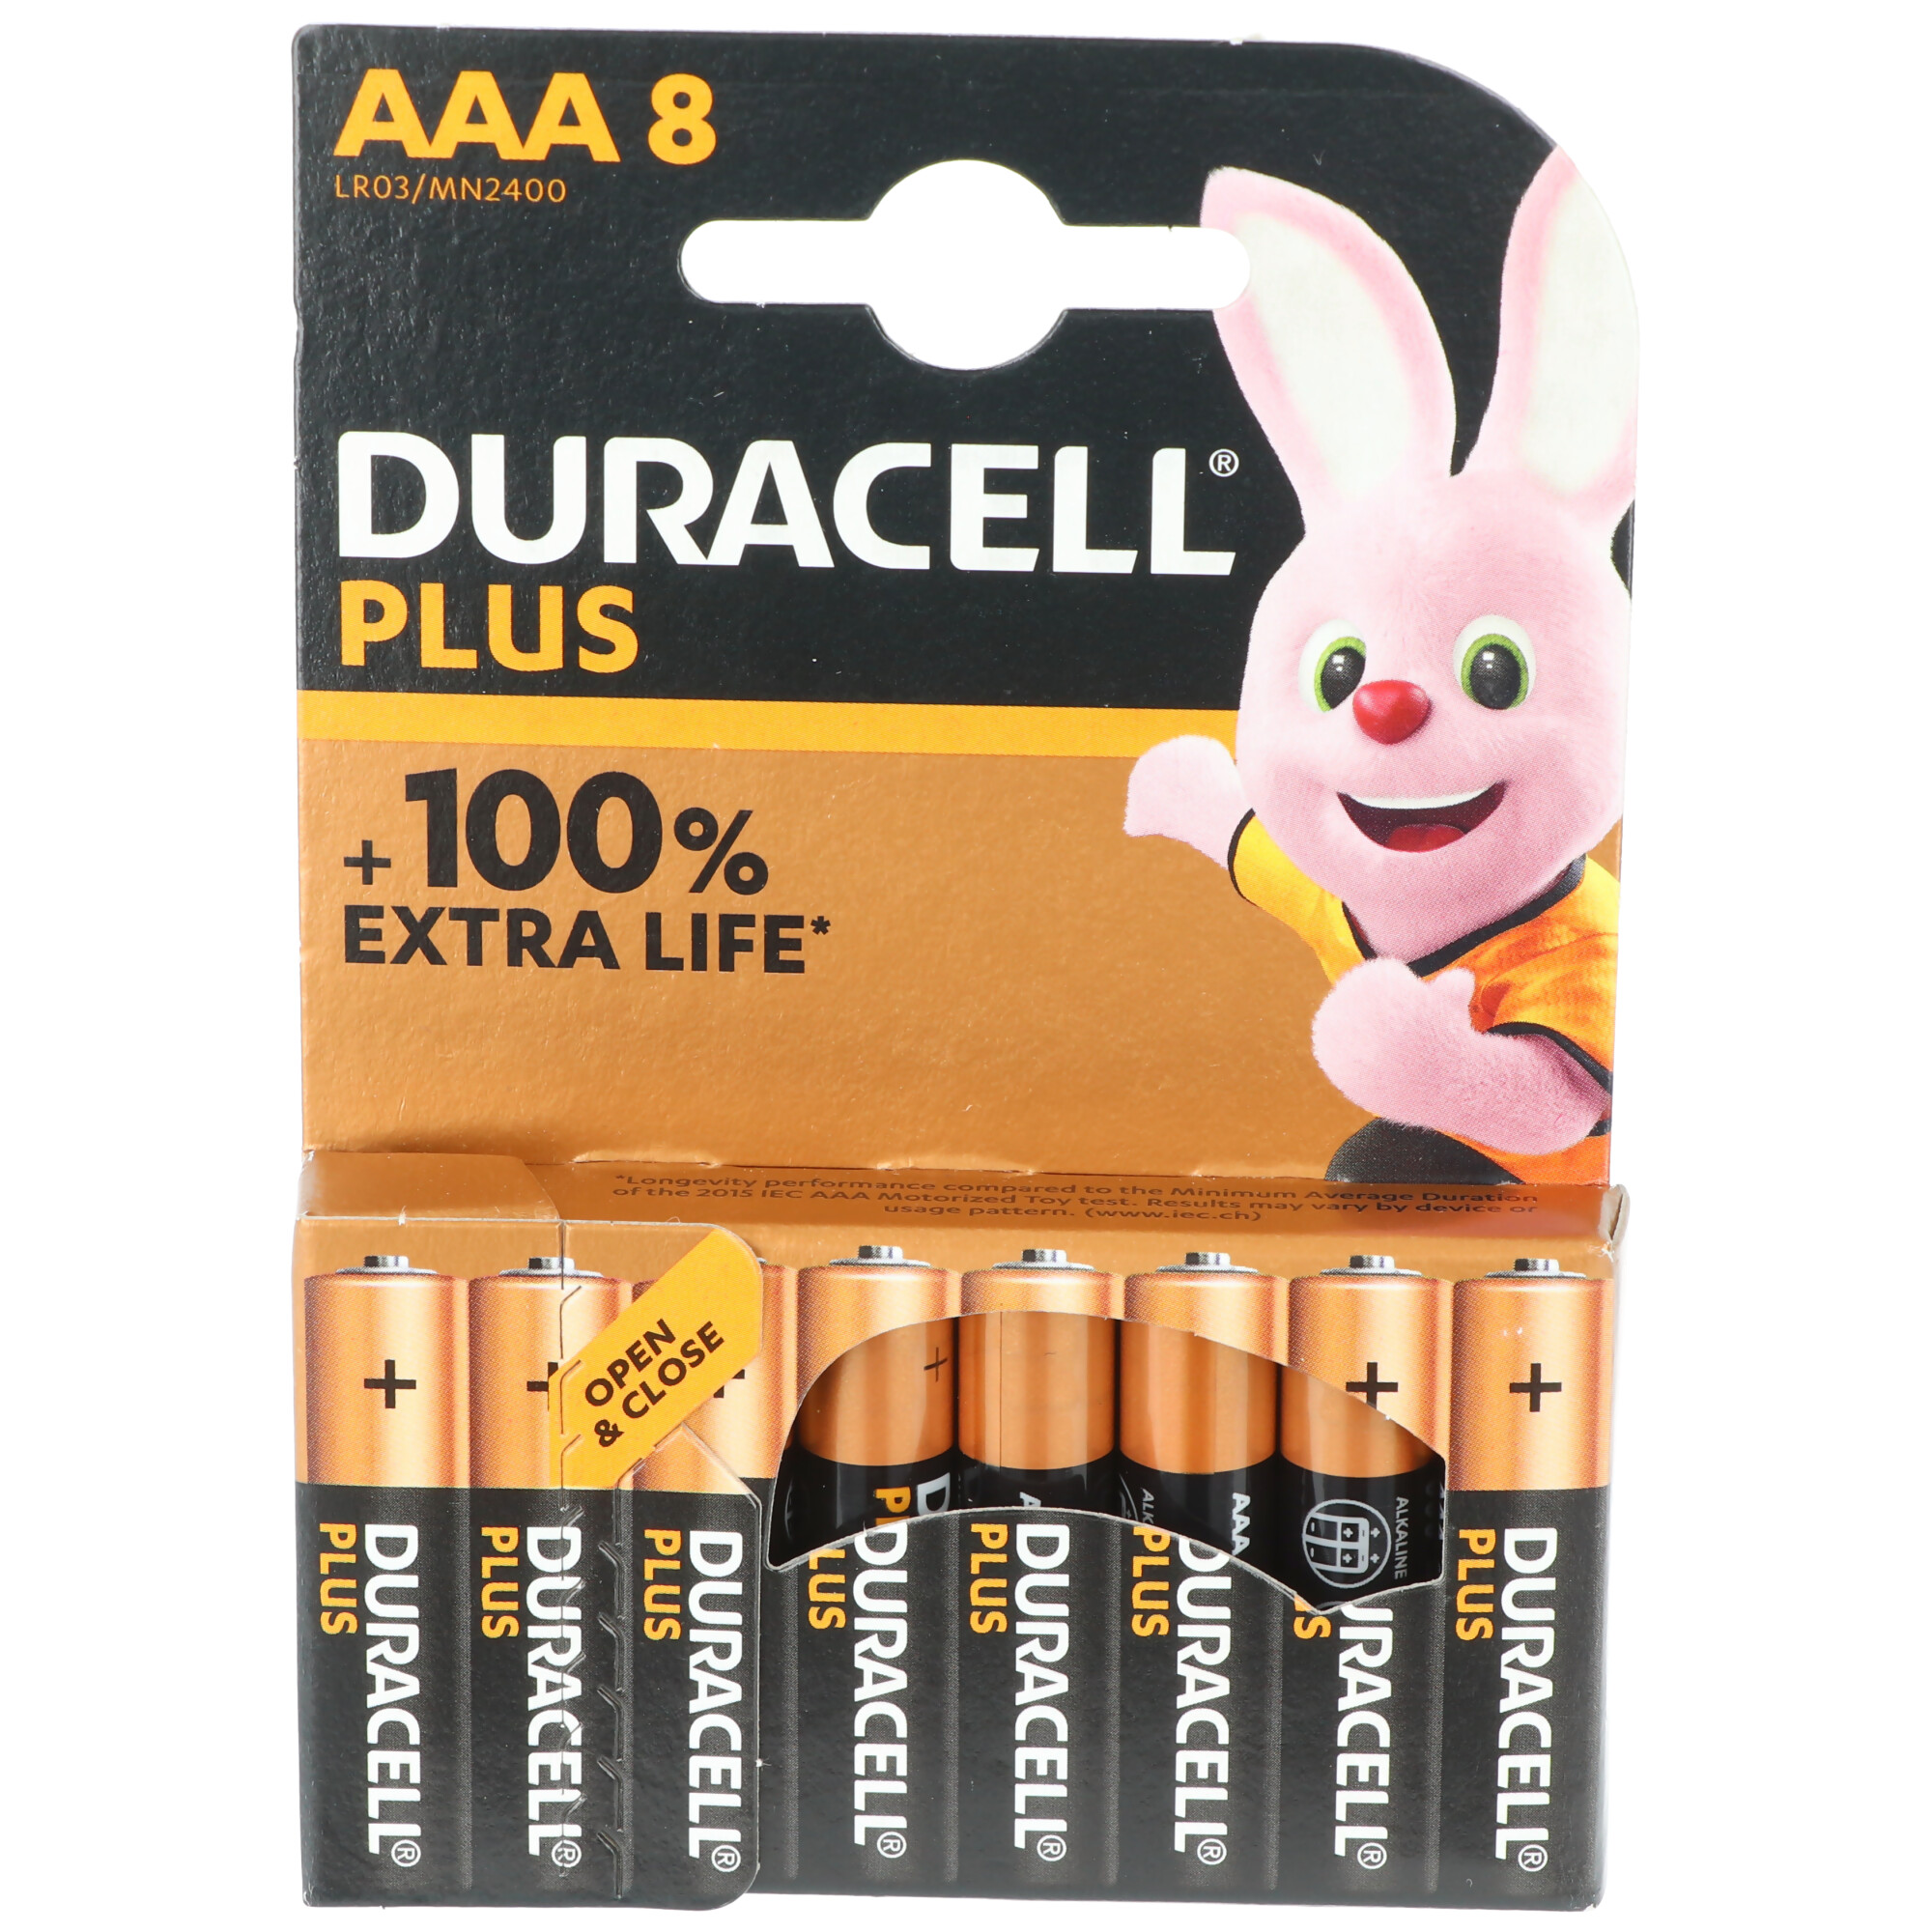 Duracell Batterie Alkaline, Micro, AAA, LR03, 1.5V Plus, Extra Life, Retail Blister (8-Pack)